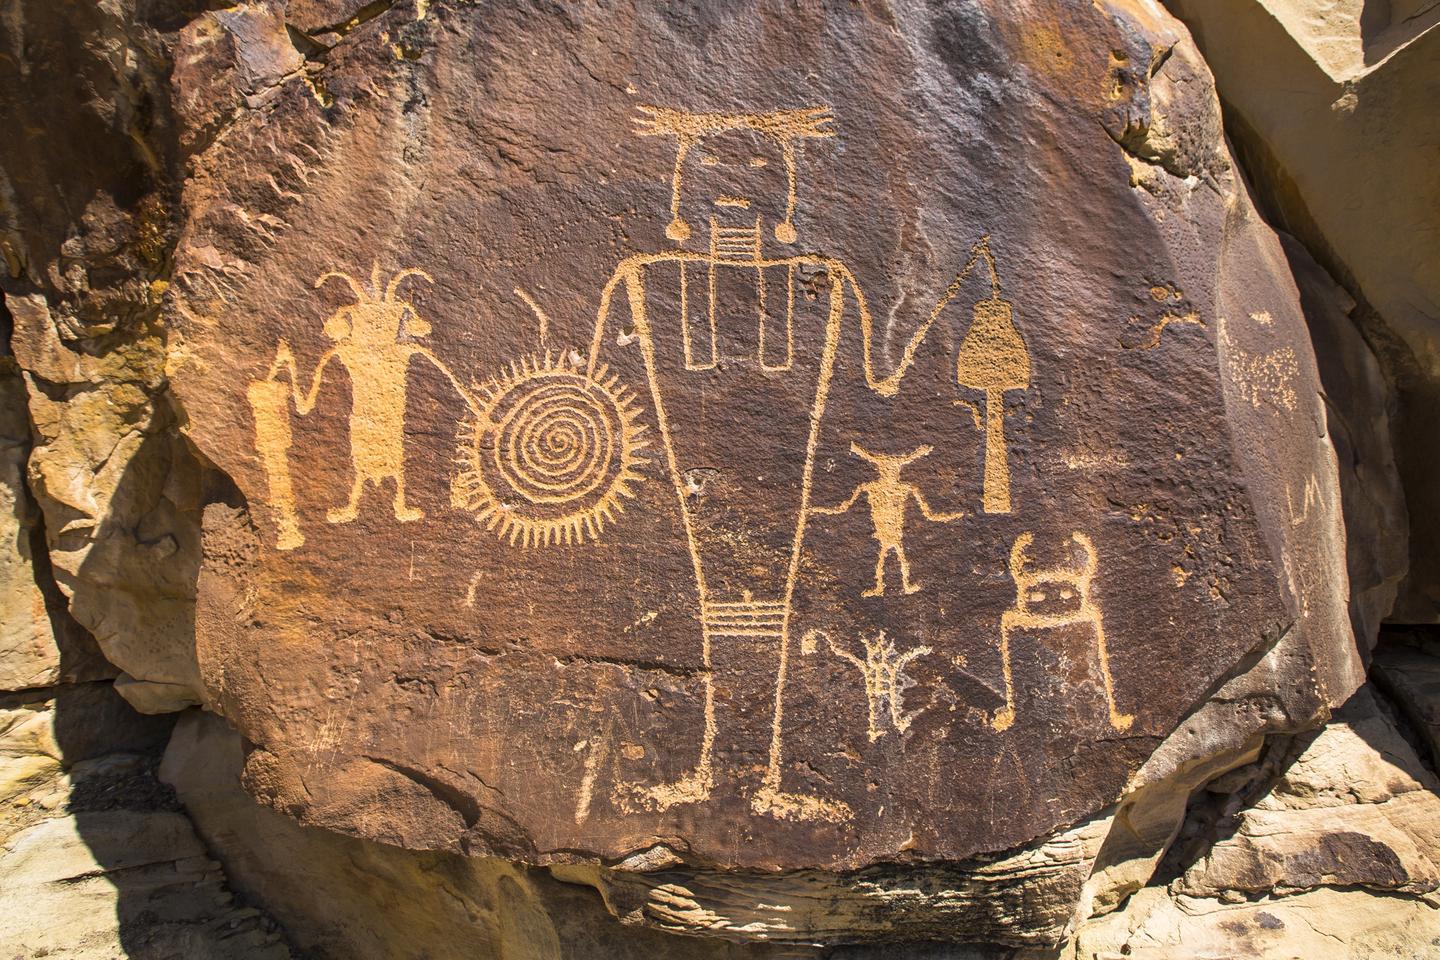 McKee Springs PetroglyphsThe ancestral indigenous peoples left petroglyphs on many of the rock cliffs within Dinosaur National Monument including those at McKee Springs